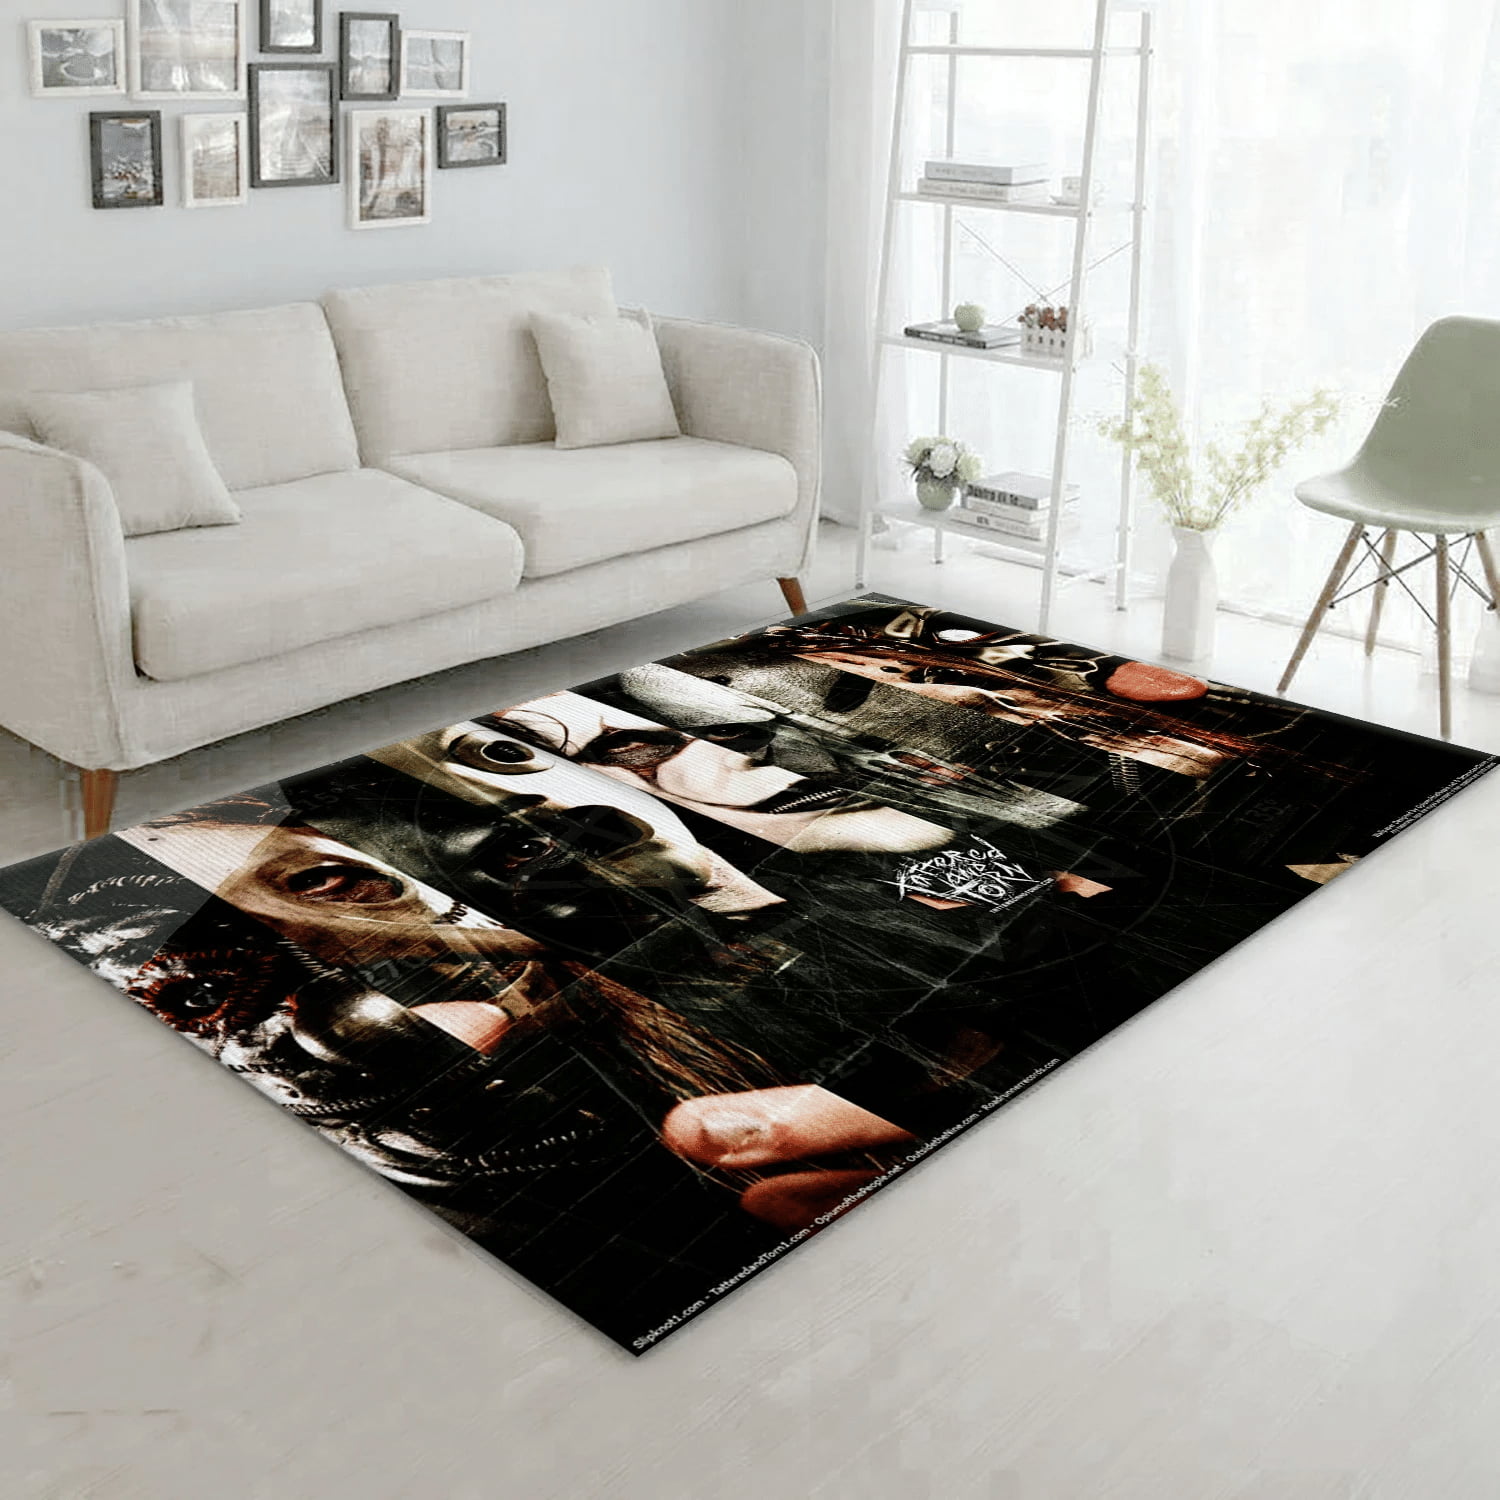 Slipknot Band 6 Music Area Rug For Christmas, Living Room Rug - Home Decor - Indoor Outdoor Rugs